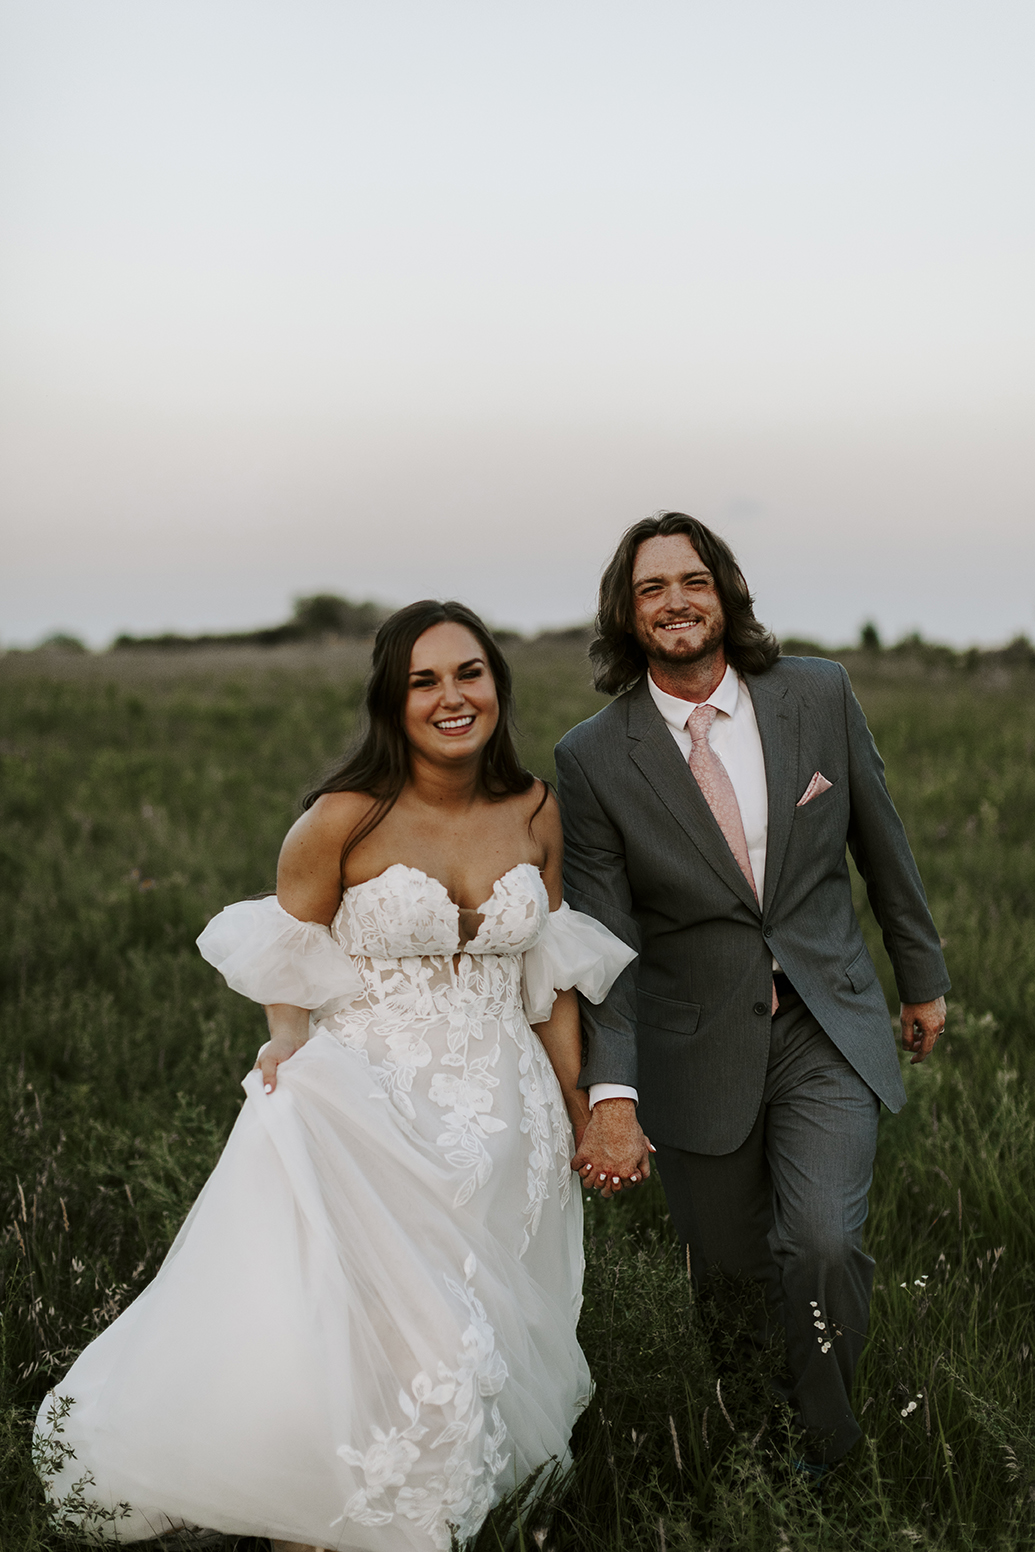 Katie and Trace hold hands and smile at the camera during their Kansas lakehouse wedding.